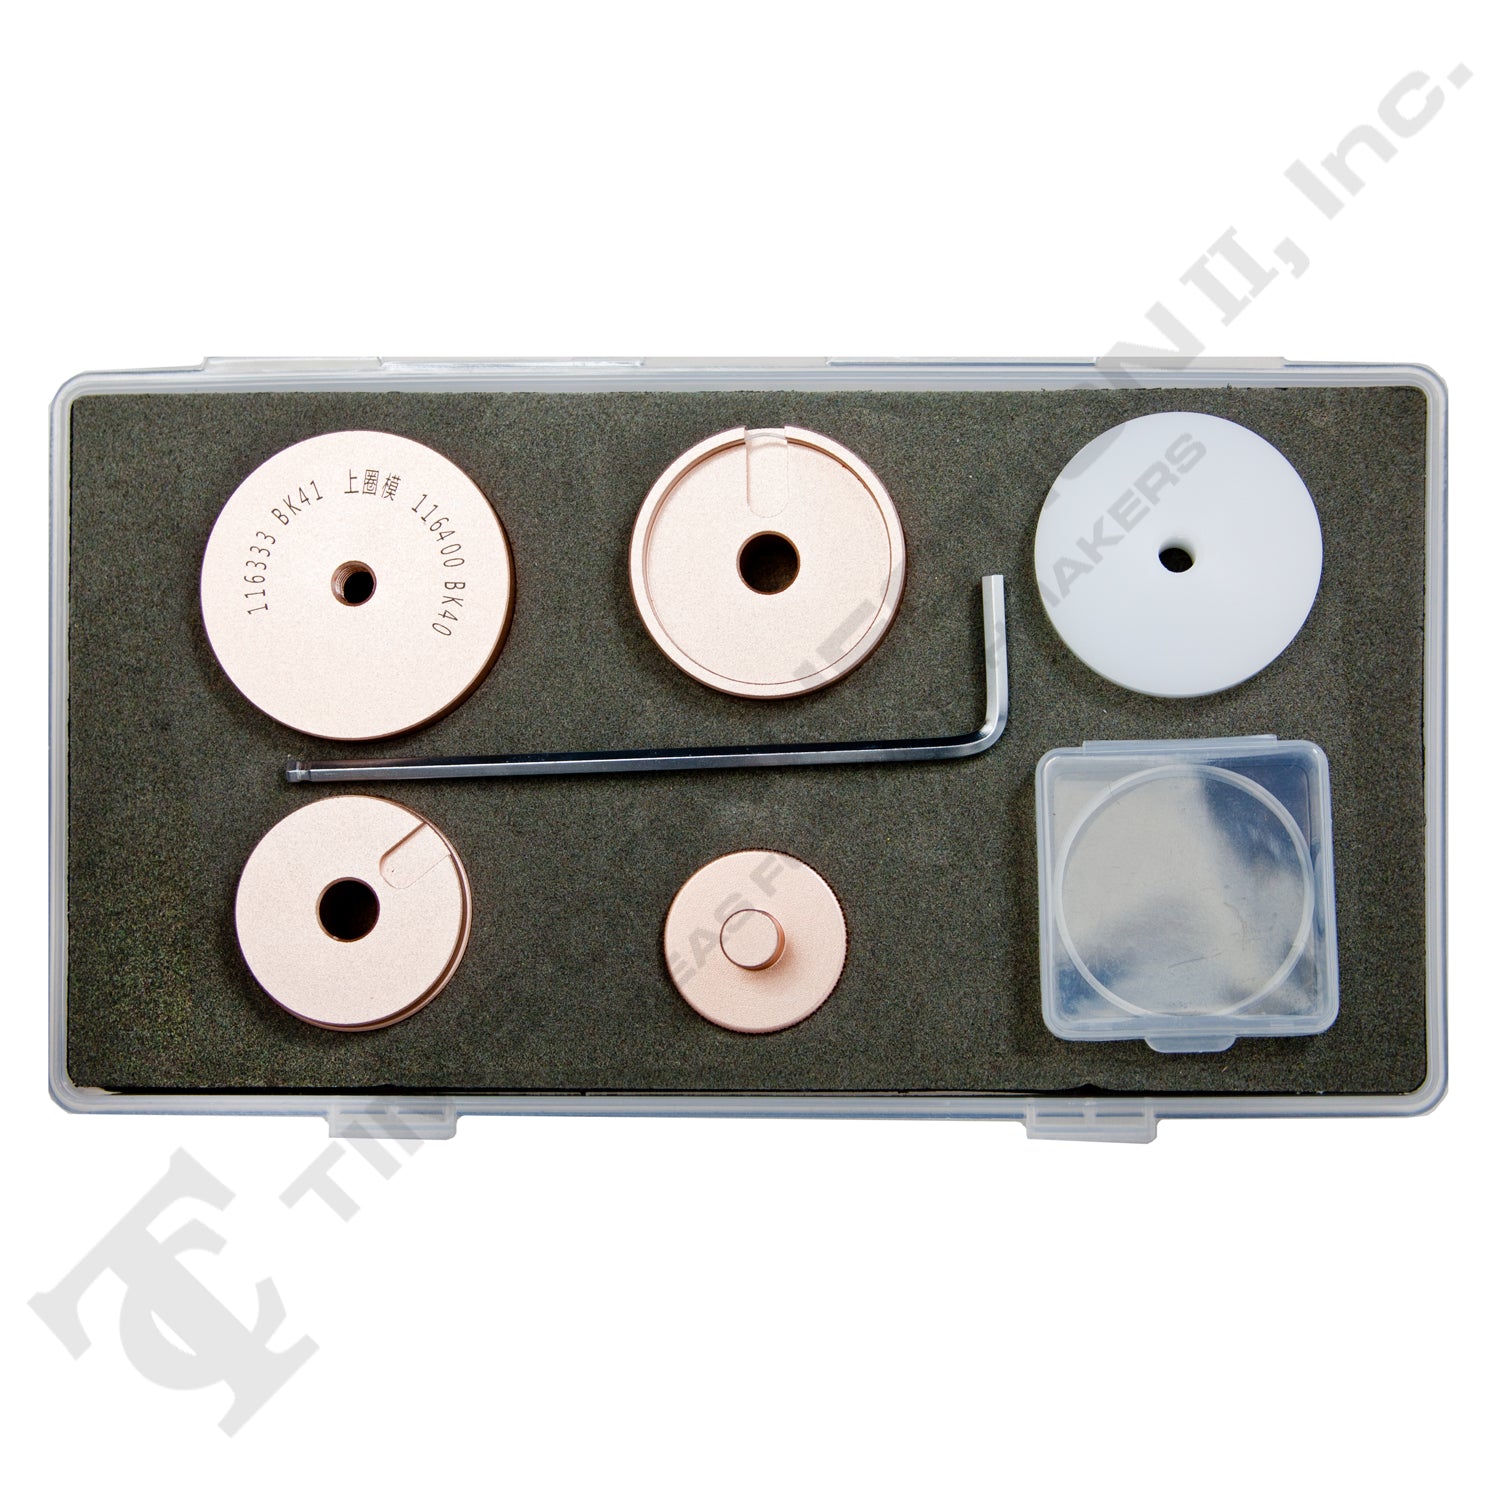 Dies Set to Fit Rolex Crystals and Gaskets for Model No. 116333, 116400